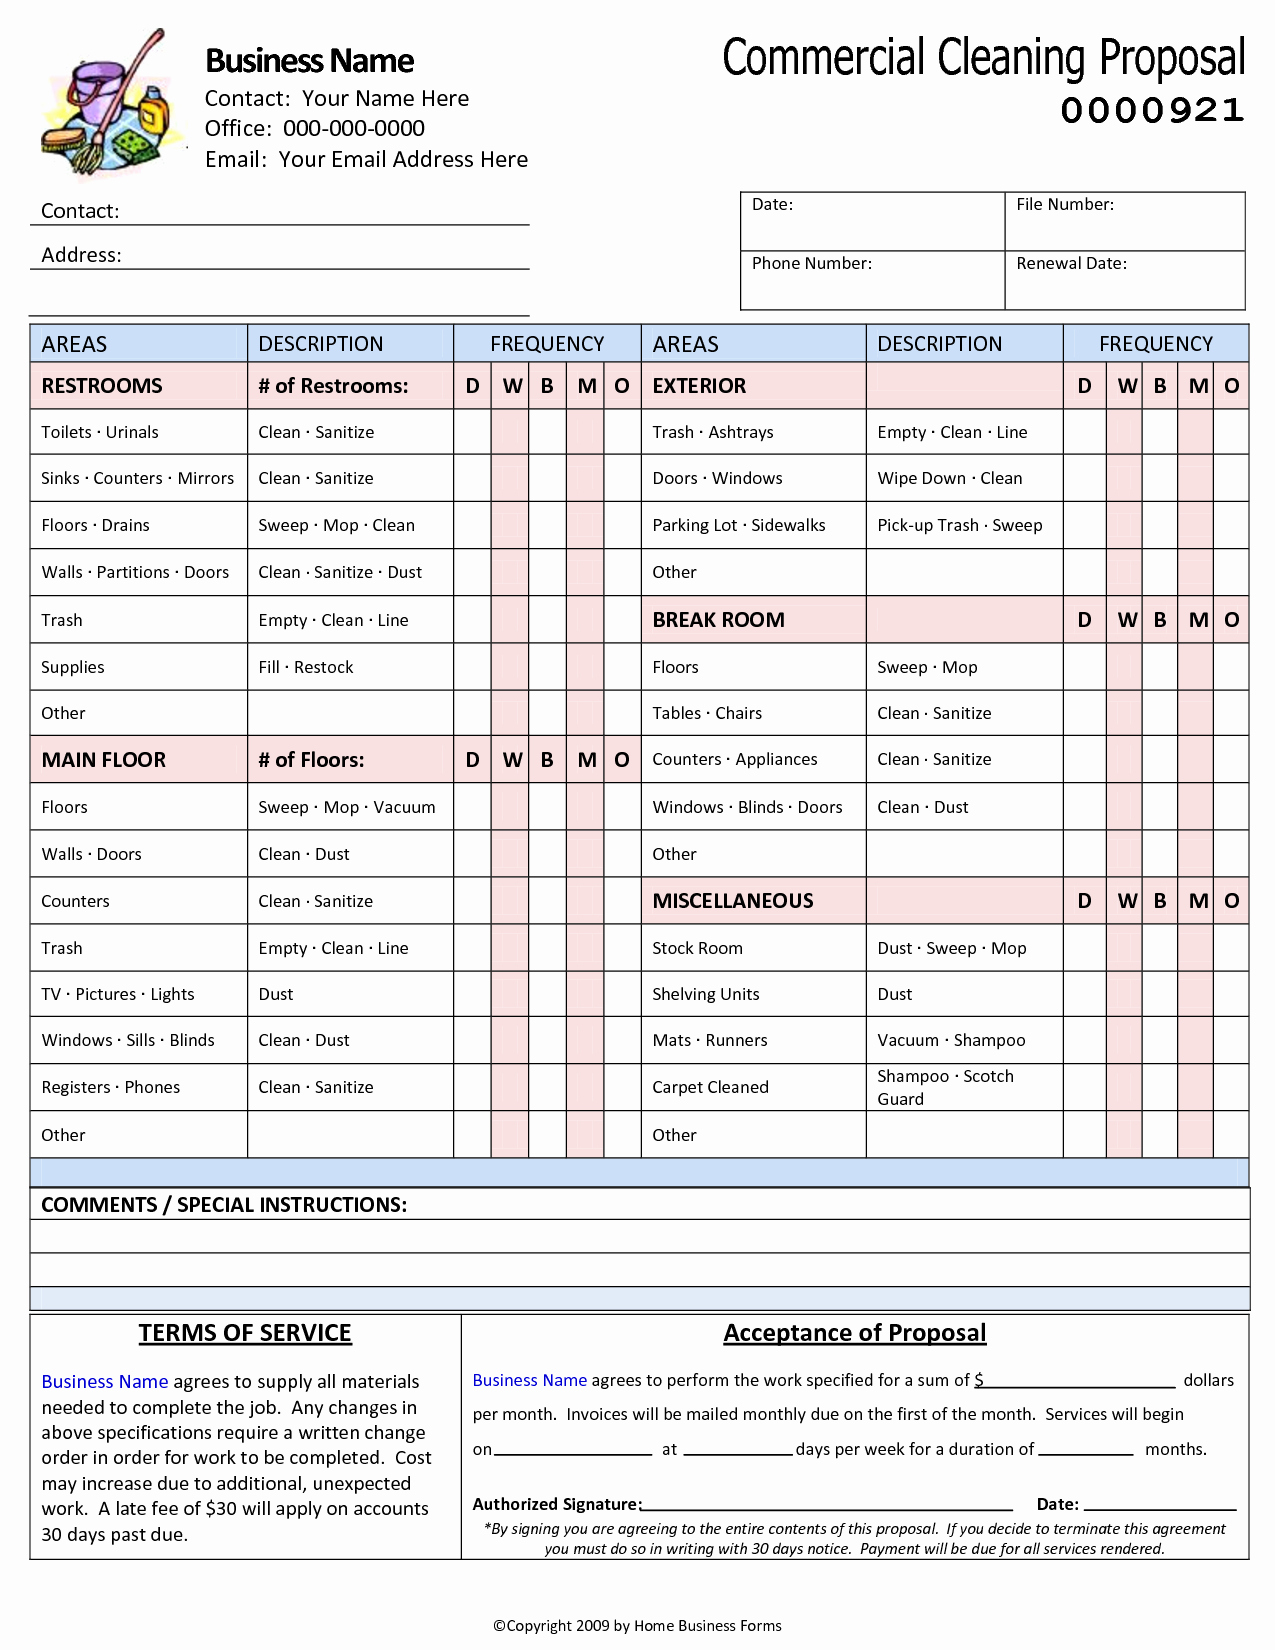 Commercial Cleaning Proposal Template Free Fresh 9 Best Of Free Printable Cleaning Business forms